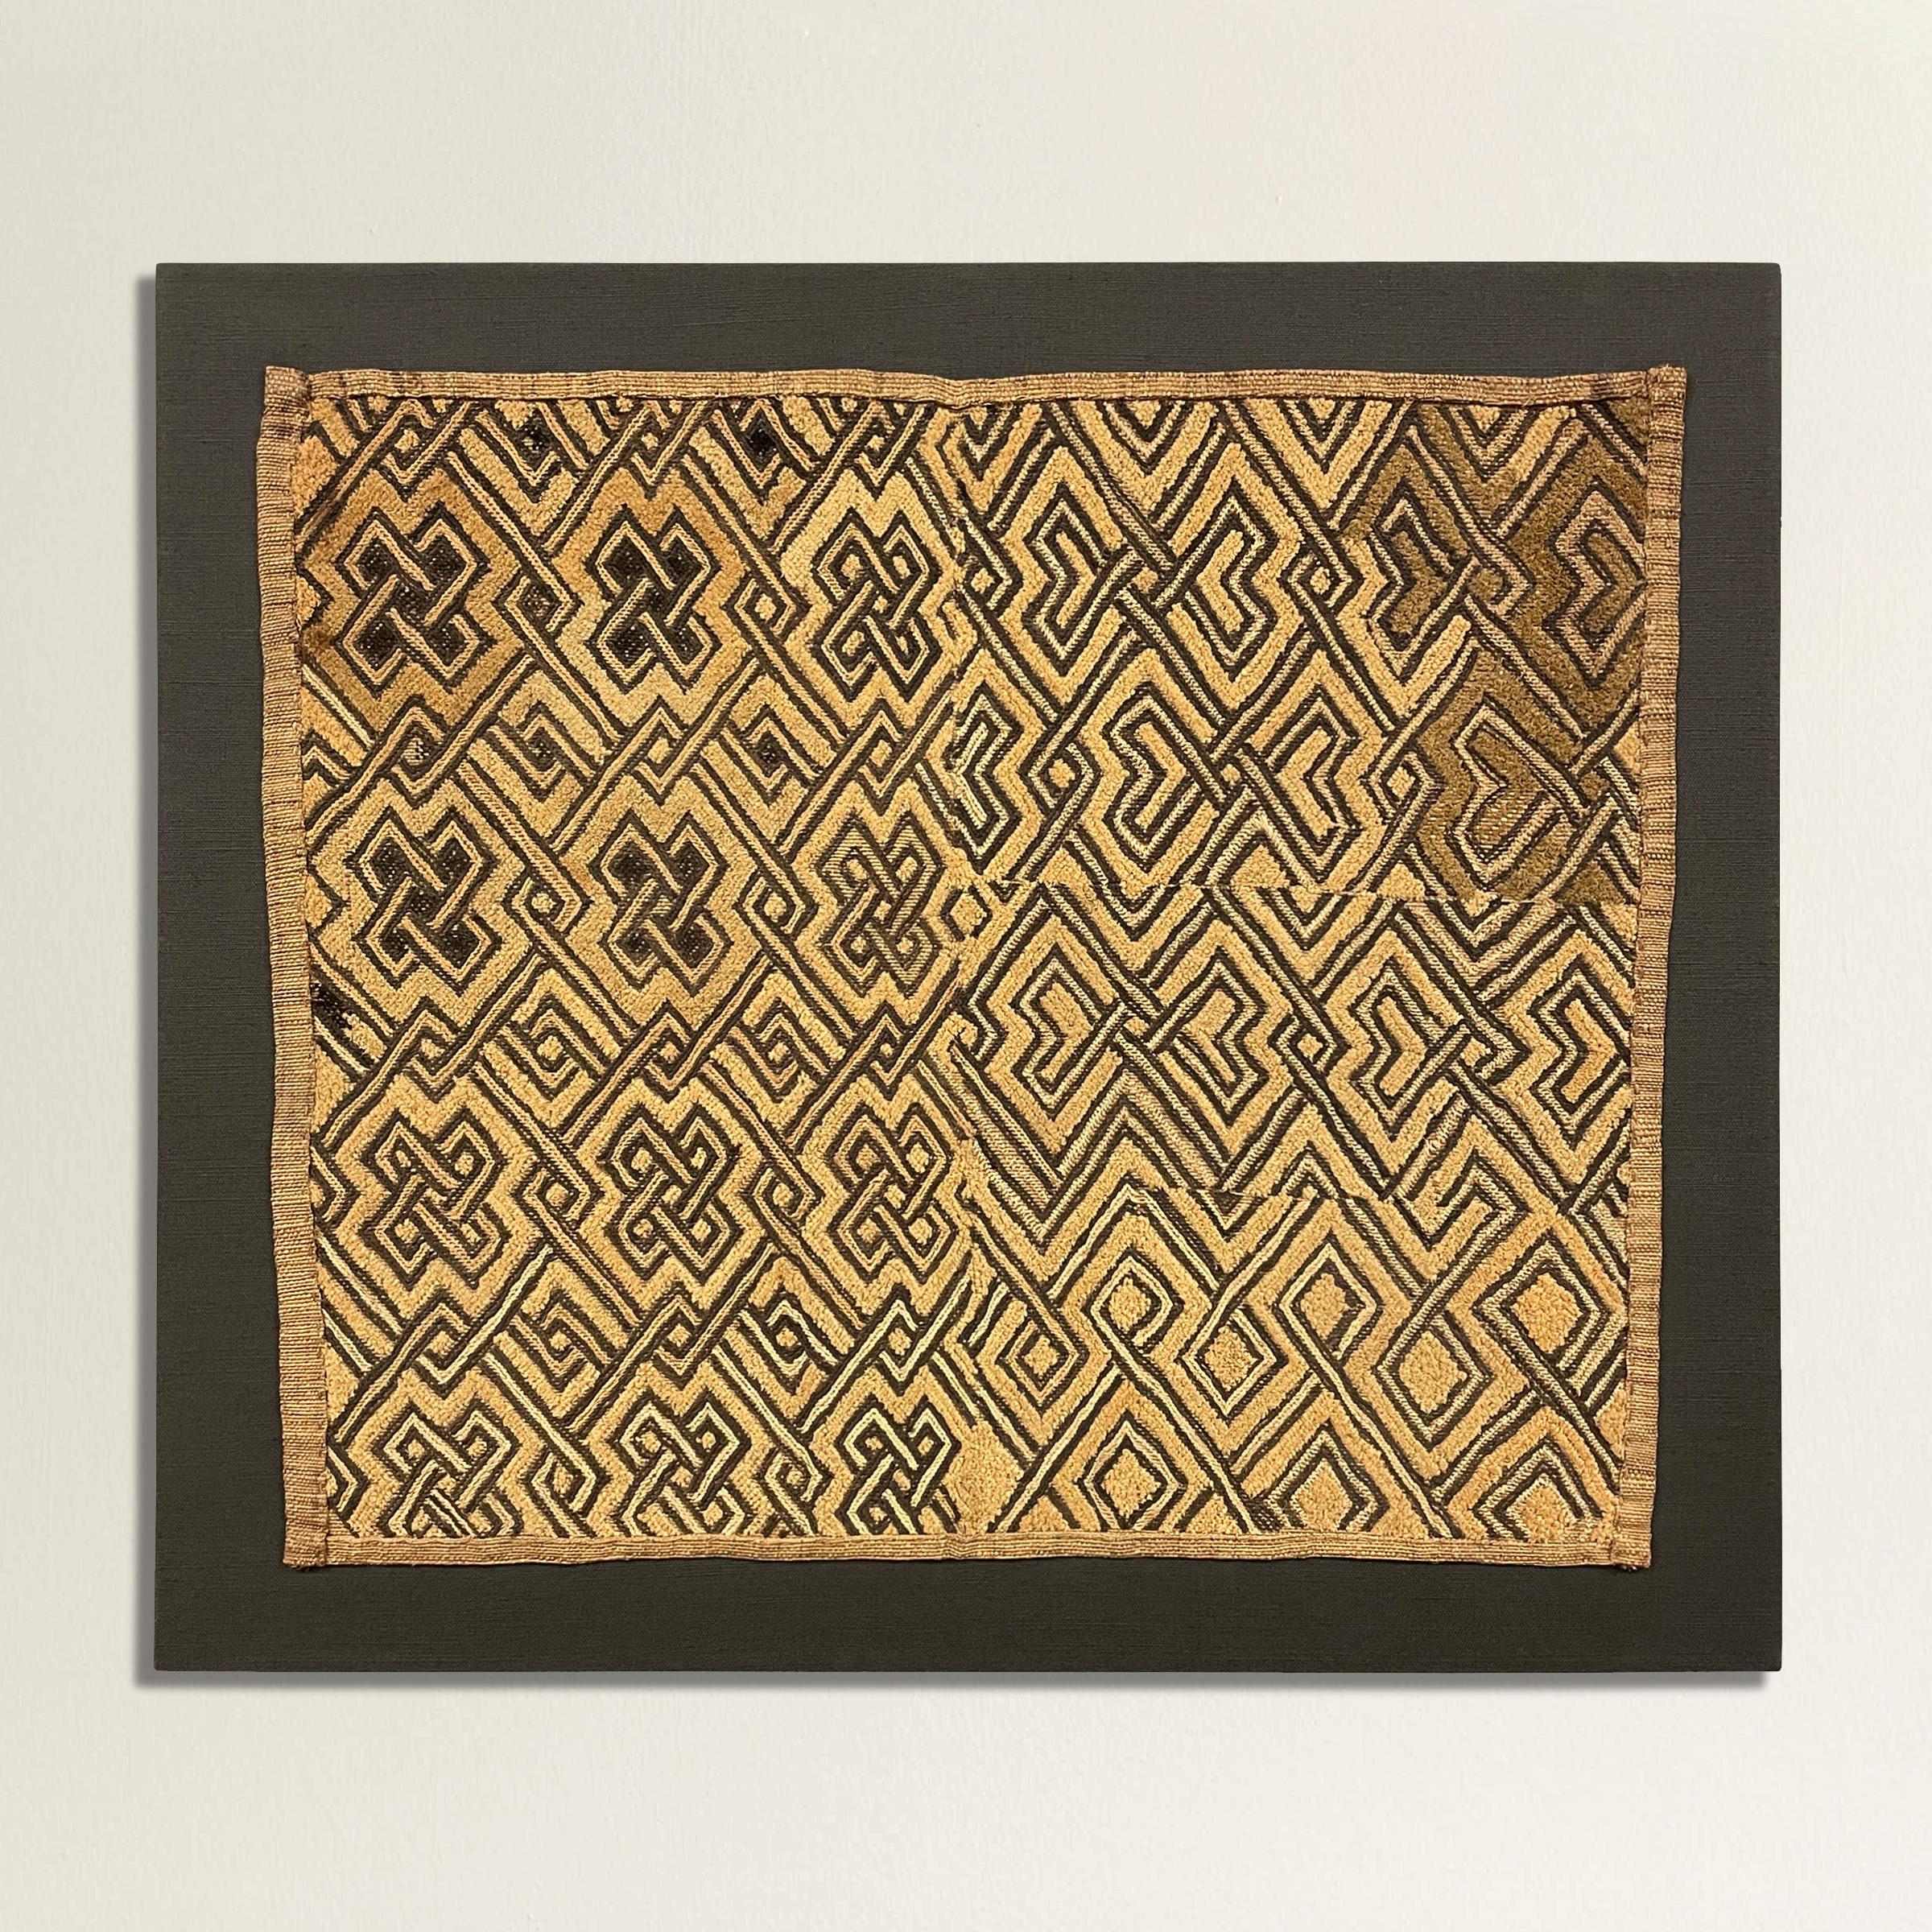 A striking 20th century Shoowa Kuba cloth panel with a fantastic all-over interlocking meandering hook and knot pattern woven in black and natural flat-weave and cut pile raffia. Kuba cloths are constructed of fine strips of raffia, knotted and cut,